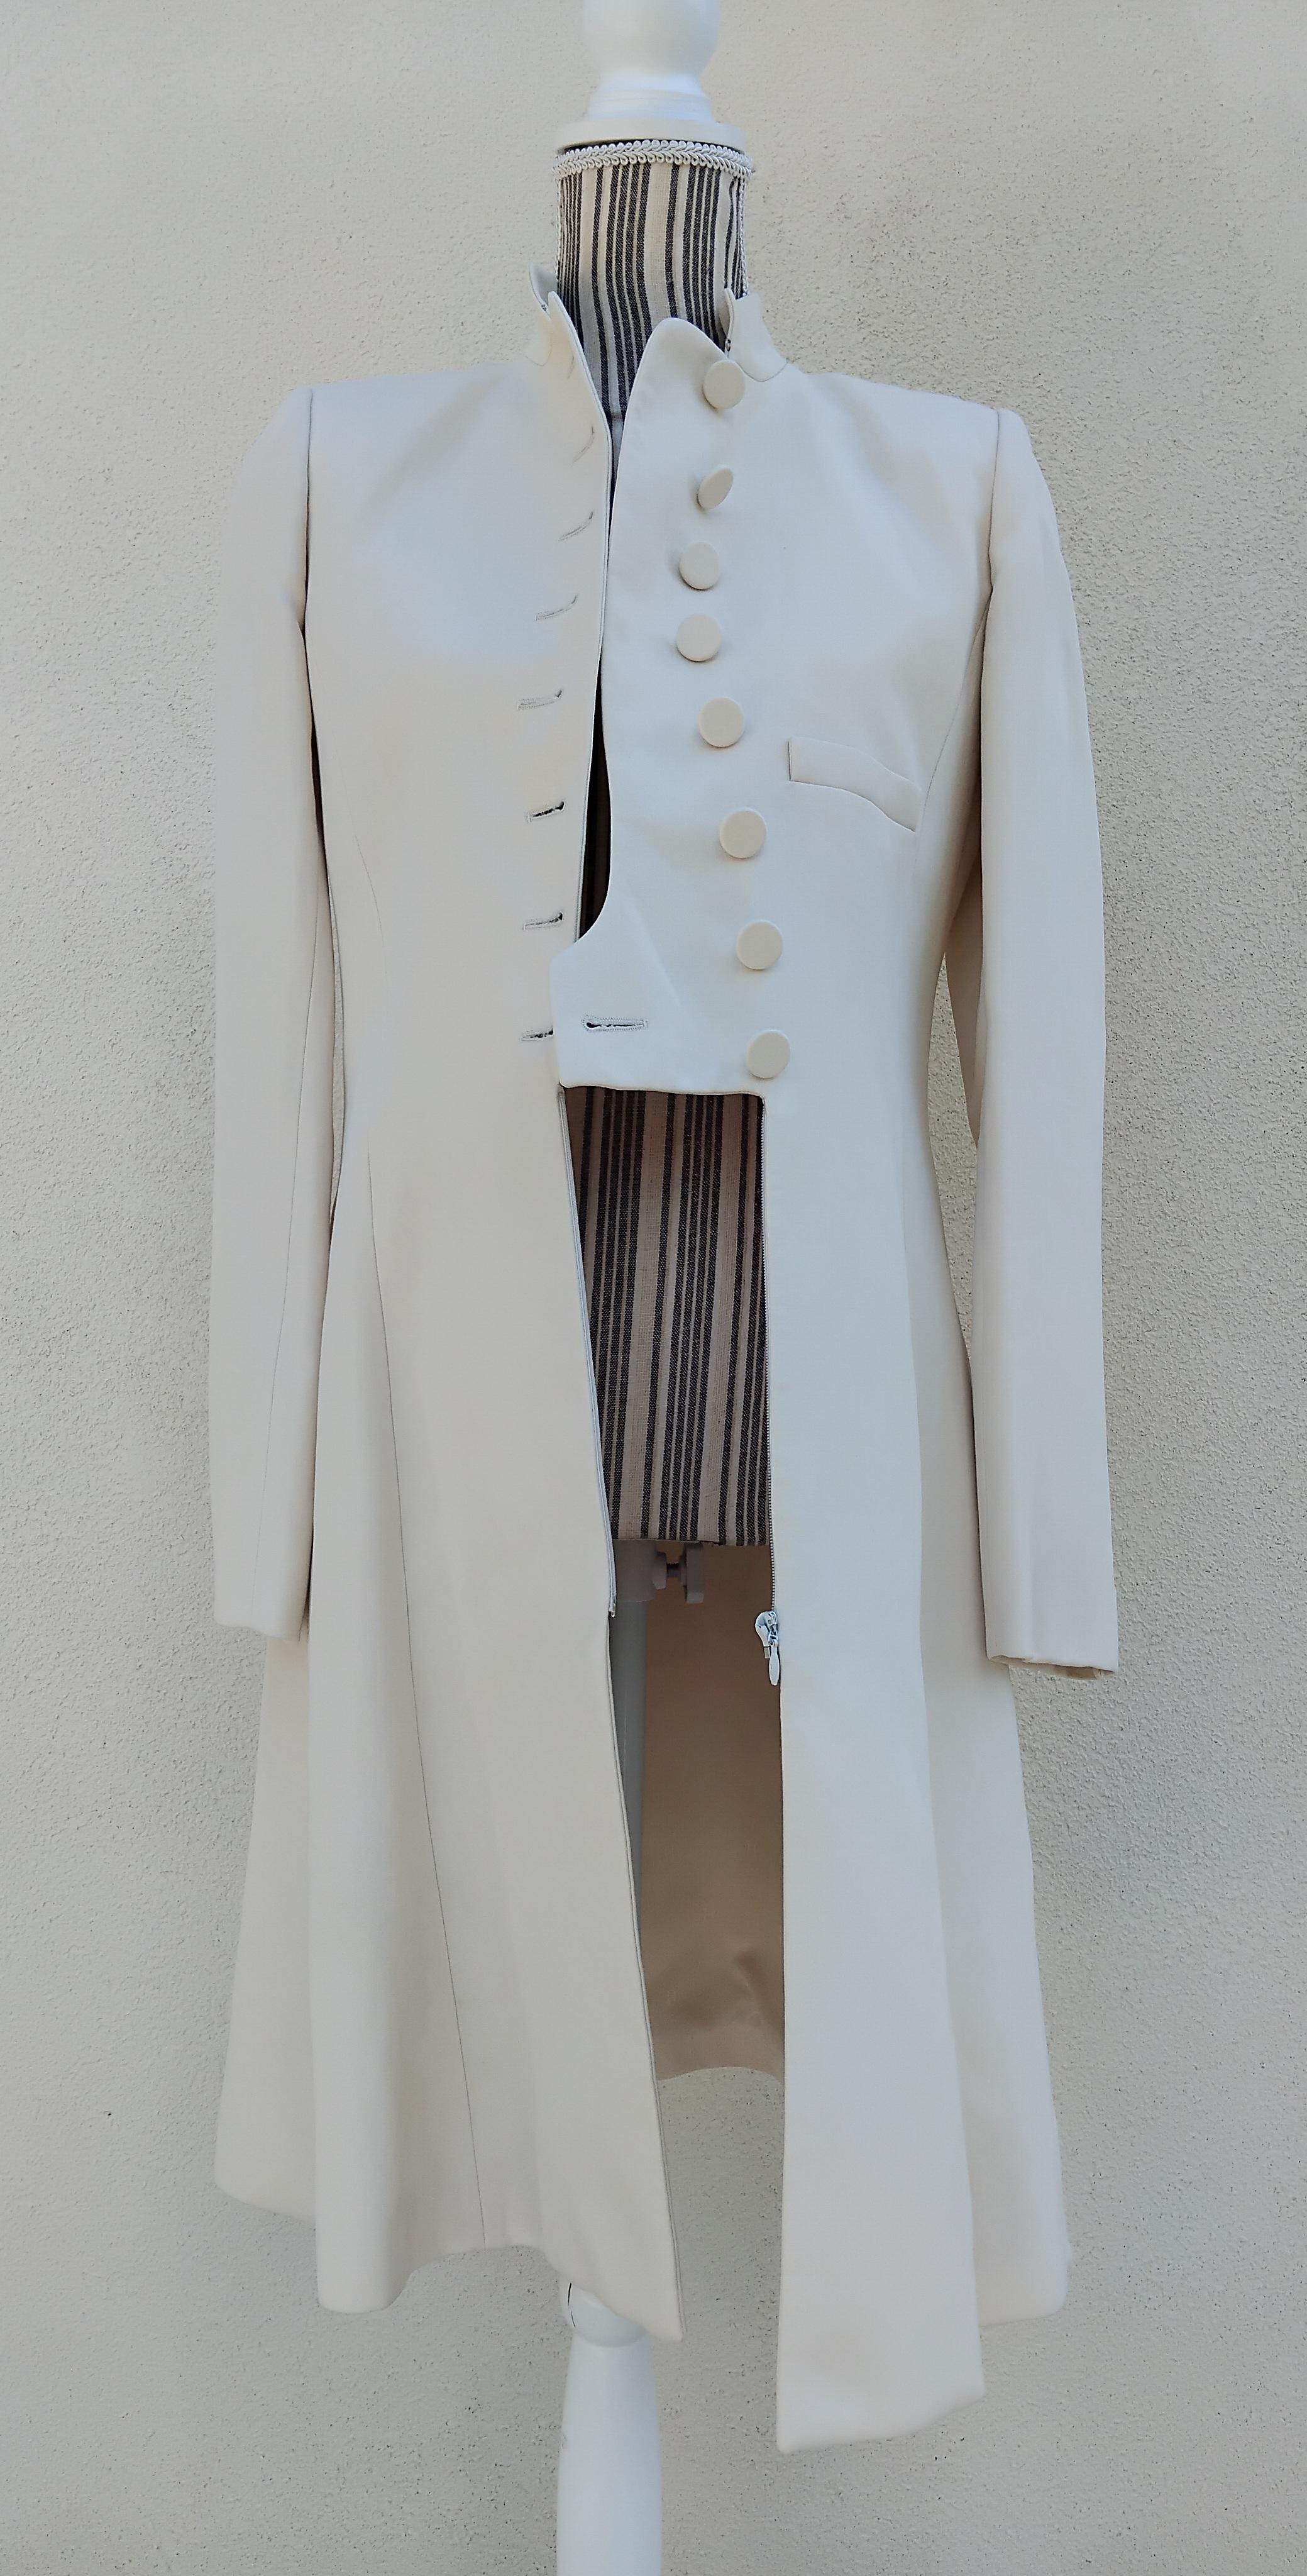 Absolutely Beautiful Authentic Hermès Coat

Perfect for spring and autumn seasons

Made in France

Made of 57% rami and 43% cotton

Colorway: Ivory 

Lined with 100% silk ivory fabric, 